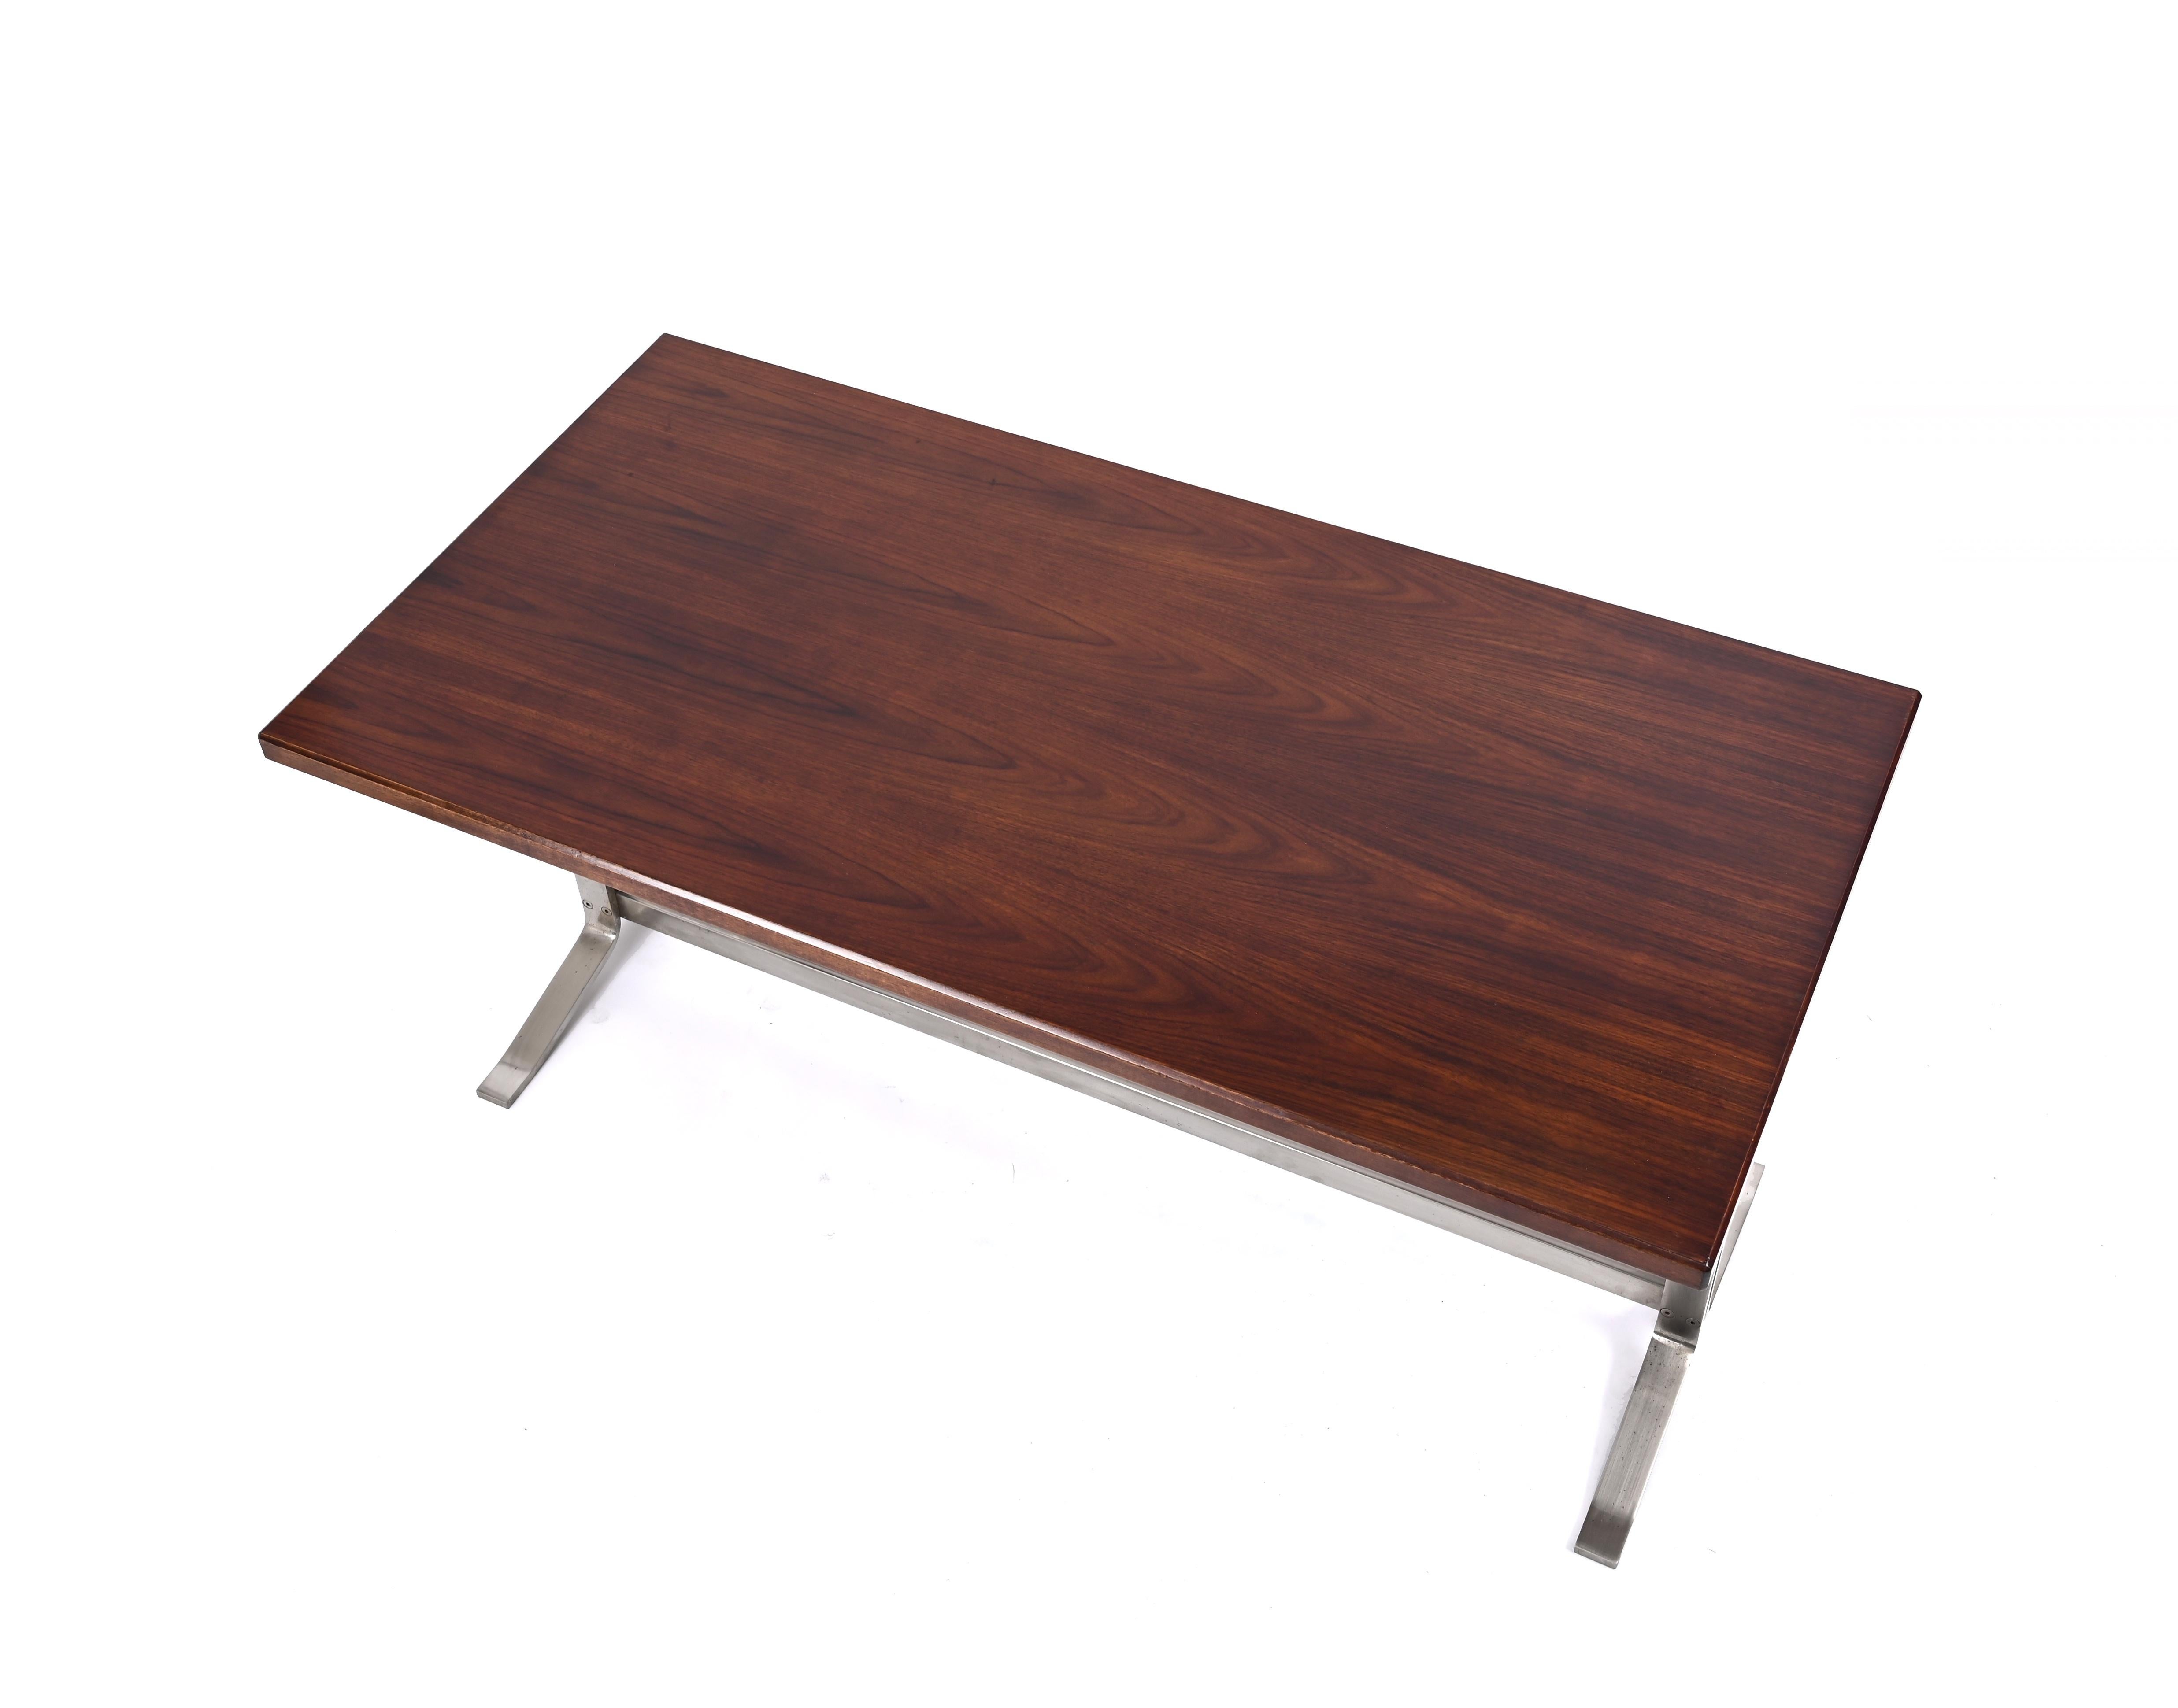 Midcentury Desk in Walnut and Steel by Moscatelli for Formanova, Italy, 1965 For Sale 9